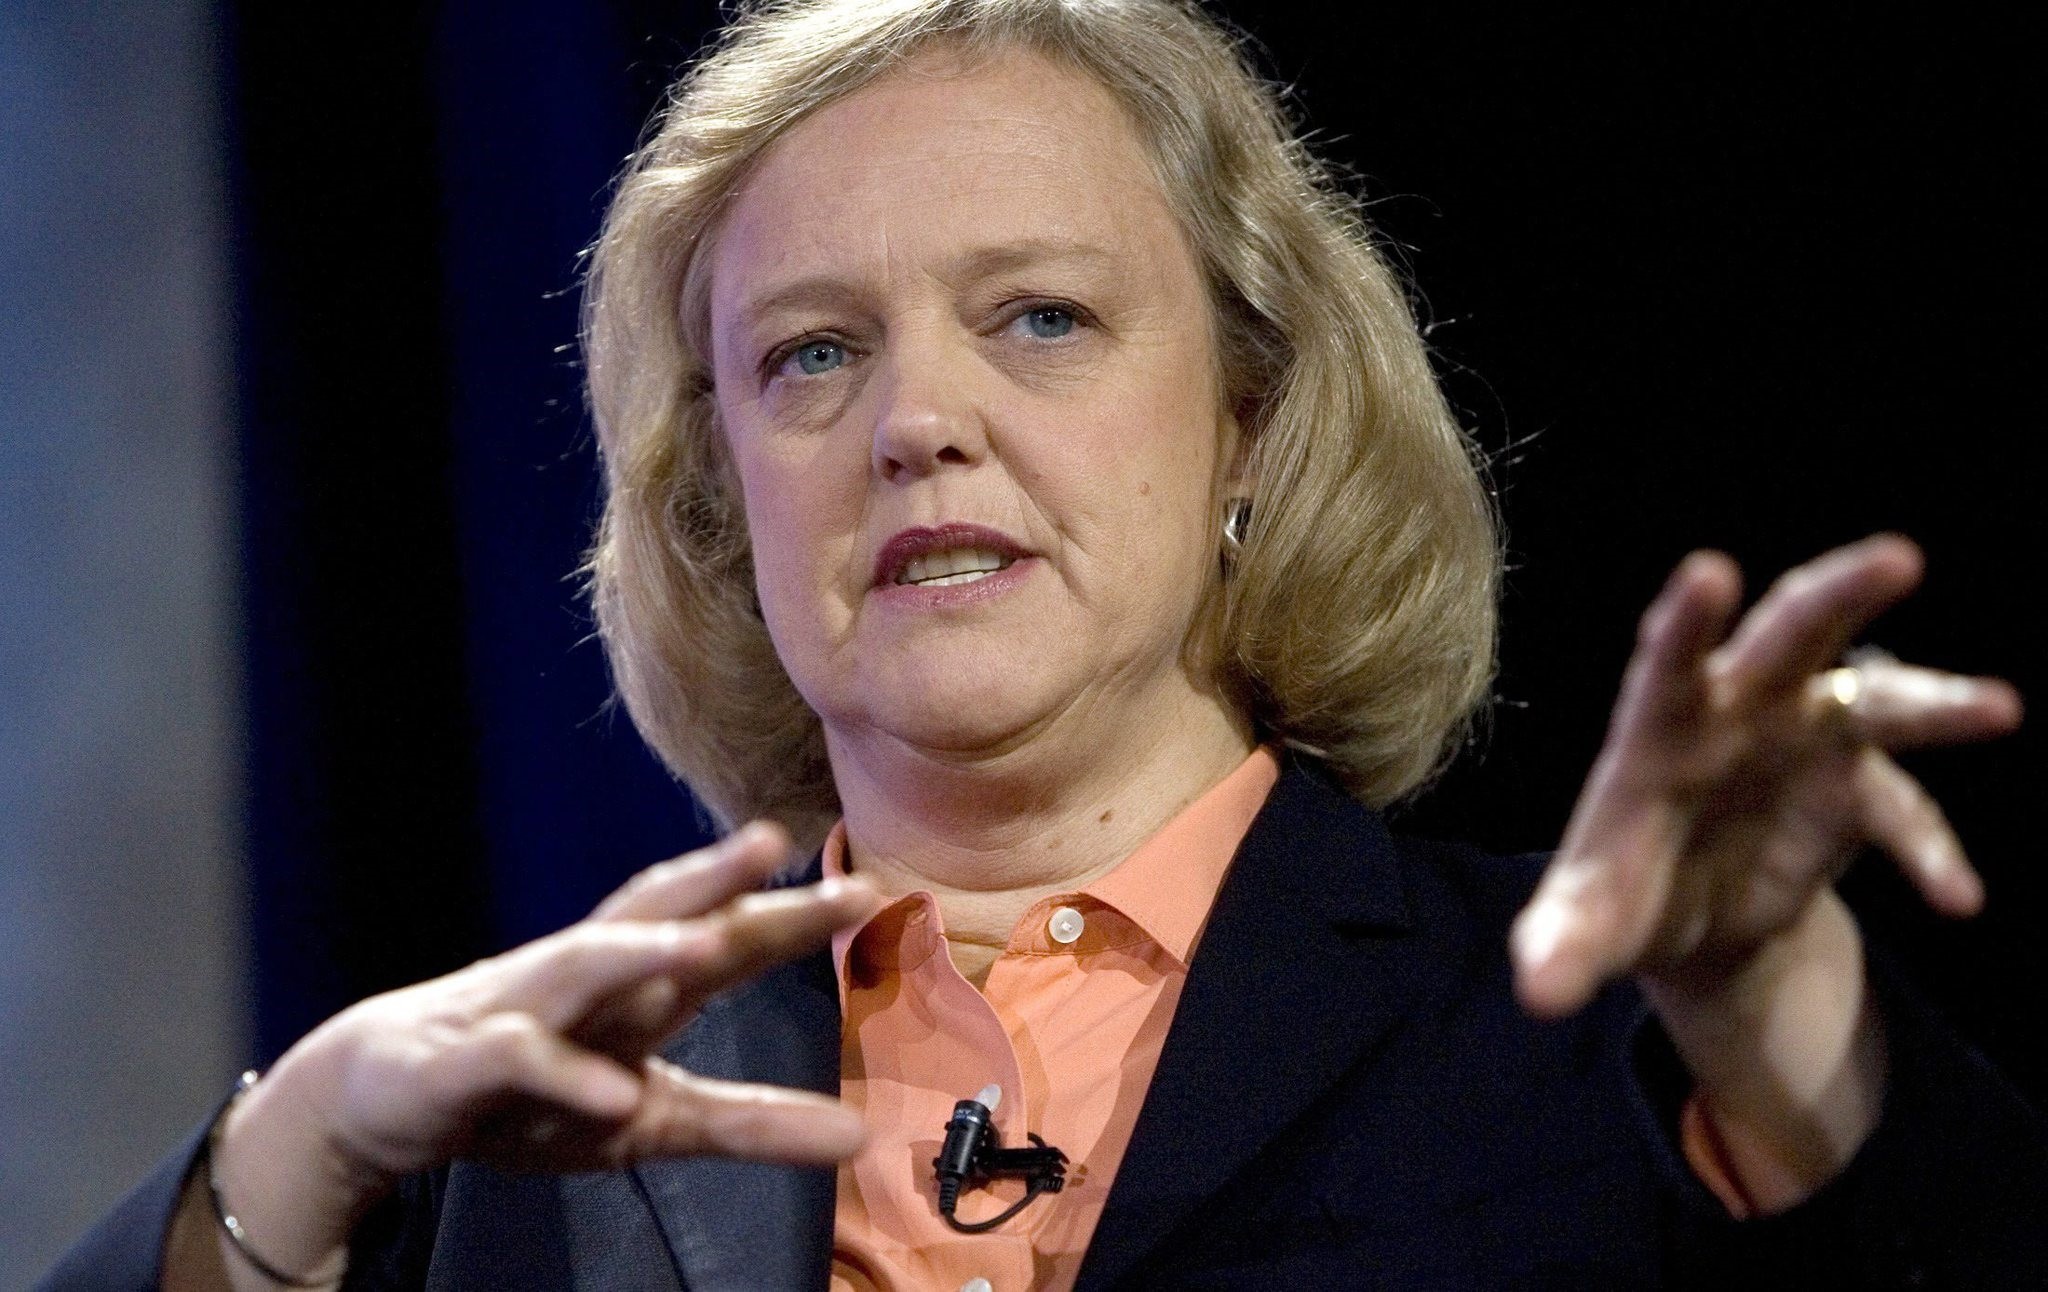 Meg Whitman, former president and CEO of eBay Inc., speaks at the Web. 2.0 Summit in San Francisco in 2007.